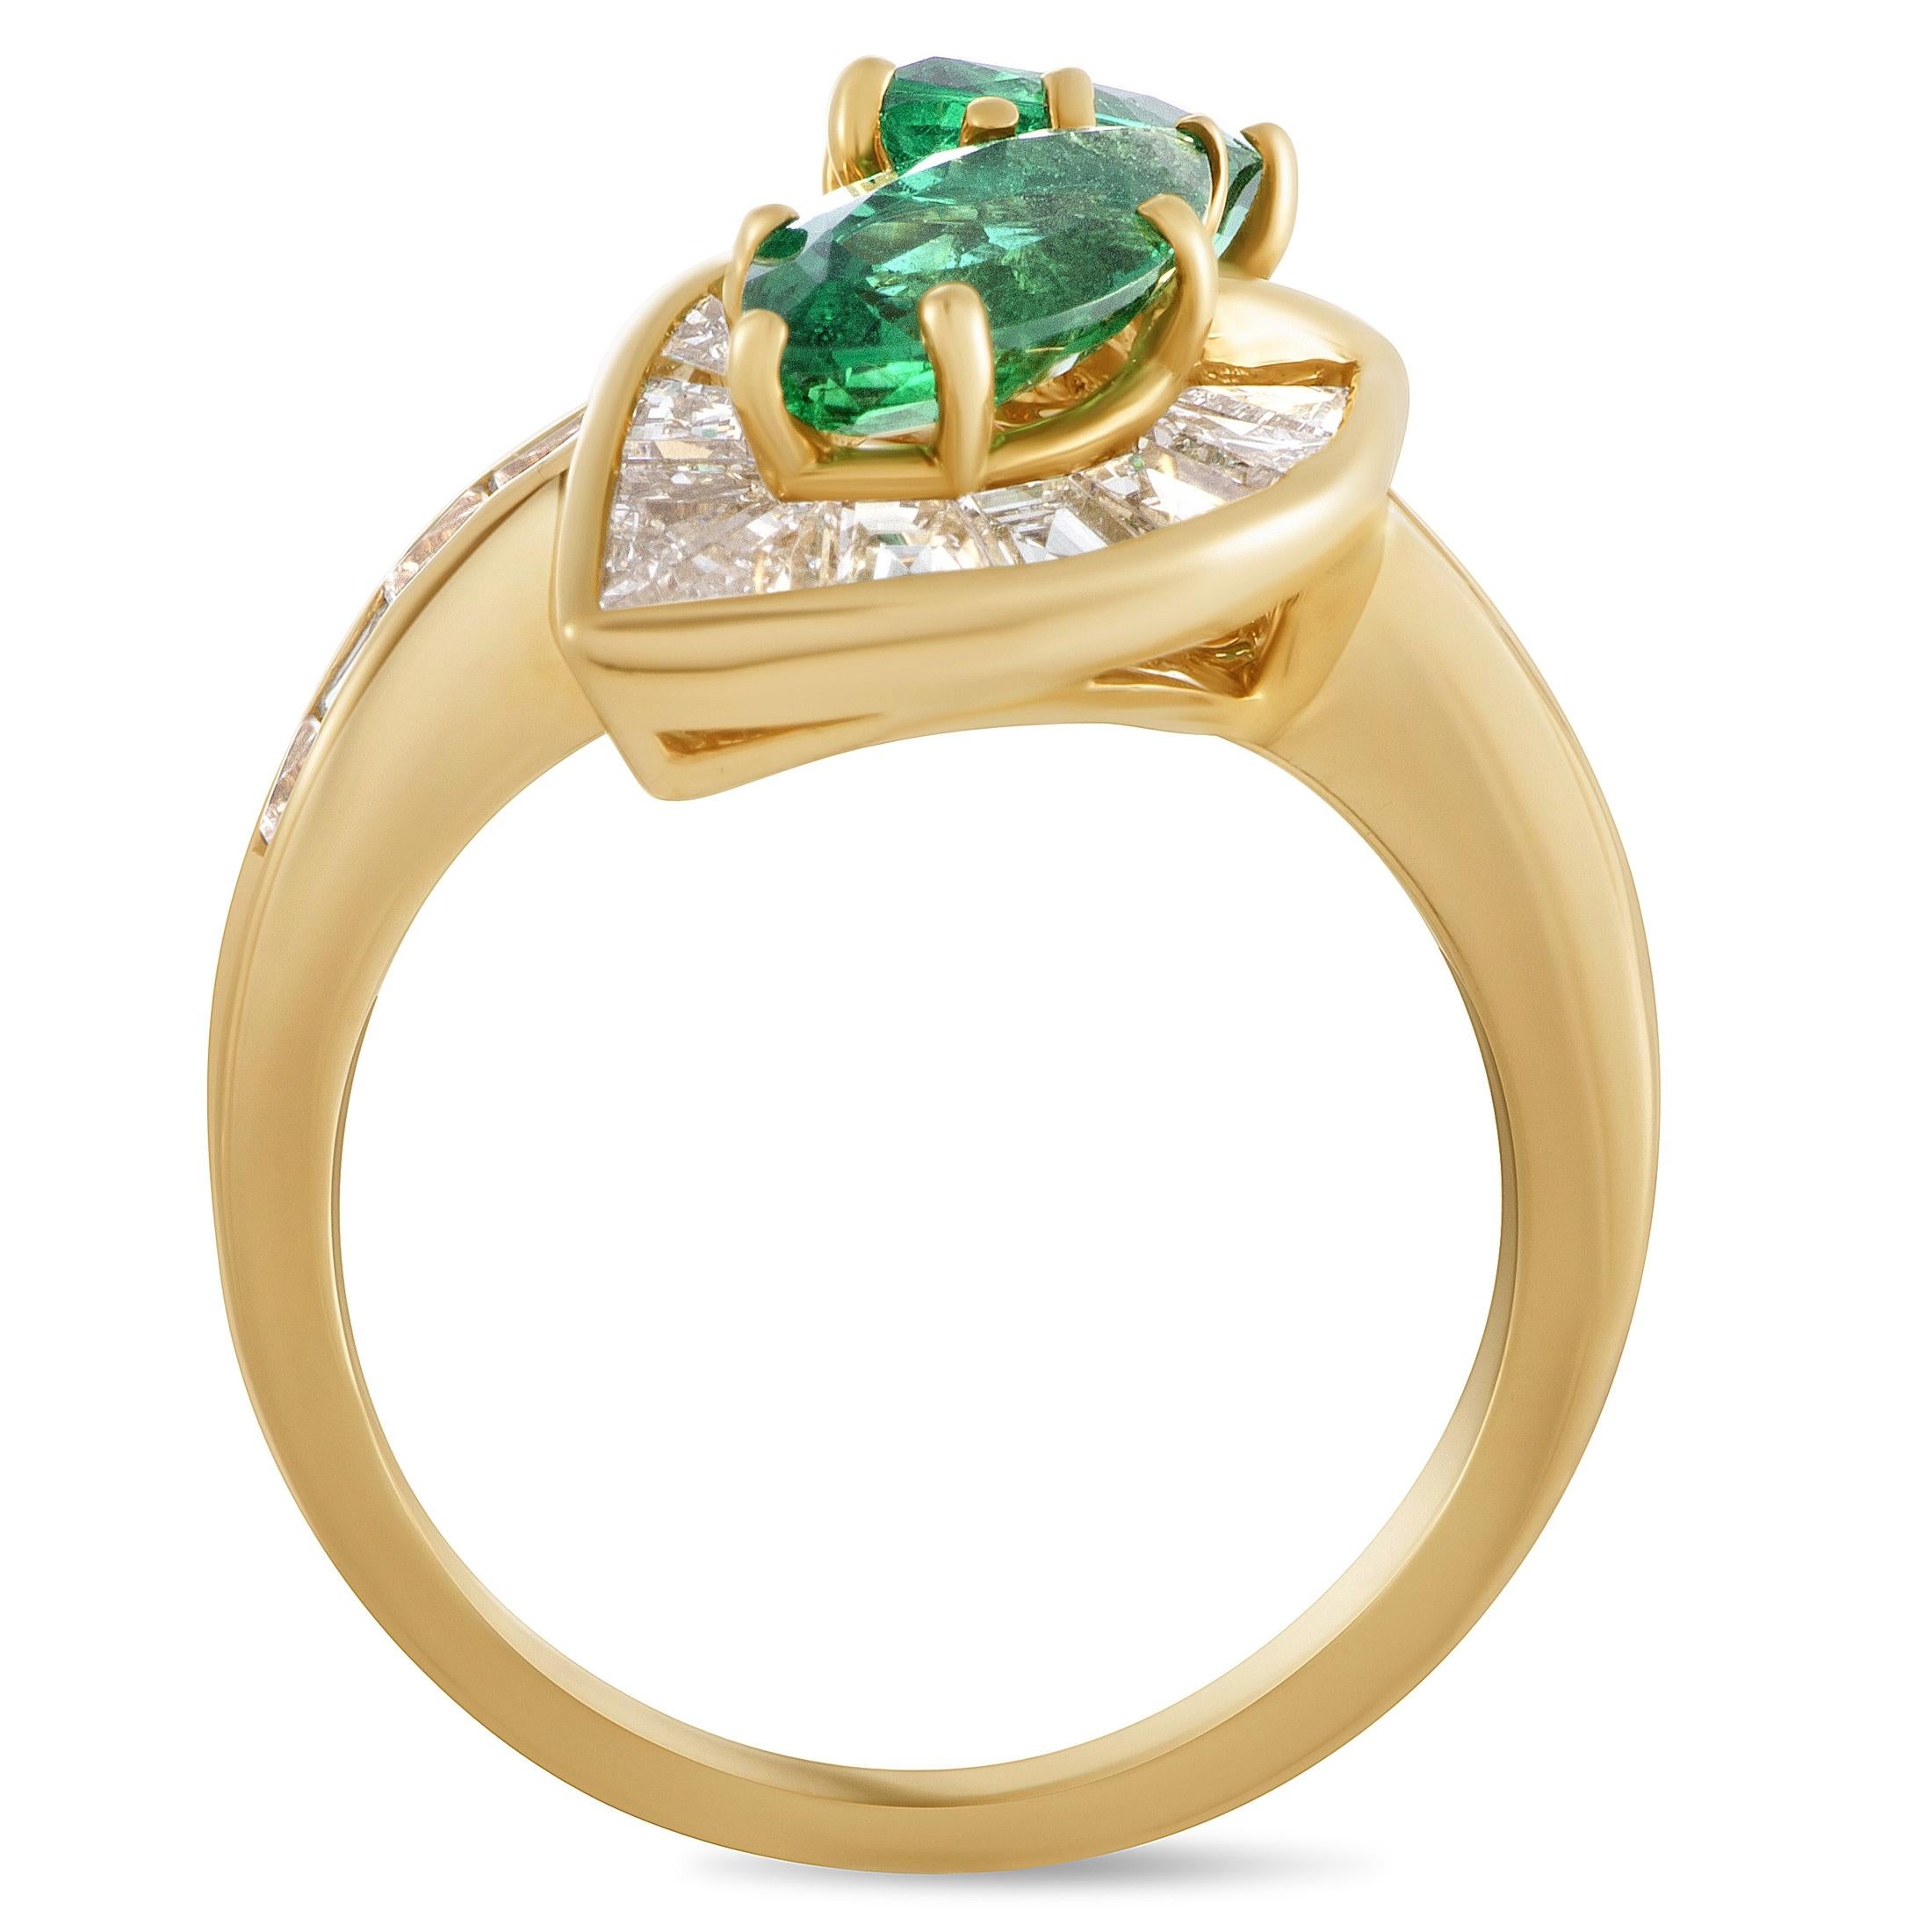 Epitomizing the very essence of prestigious extravagance, this majestic ring from Graff will add a compellingly luxe touch to any ensemble of yours. The ring is expertly crafted from 18K yellow gold and it is set with resplendent diamonds and regal